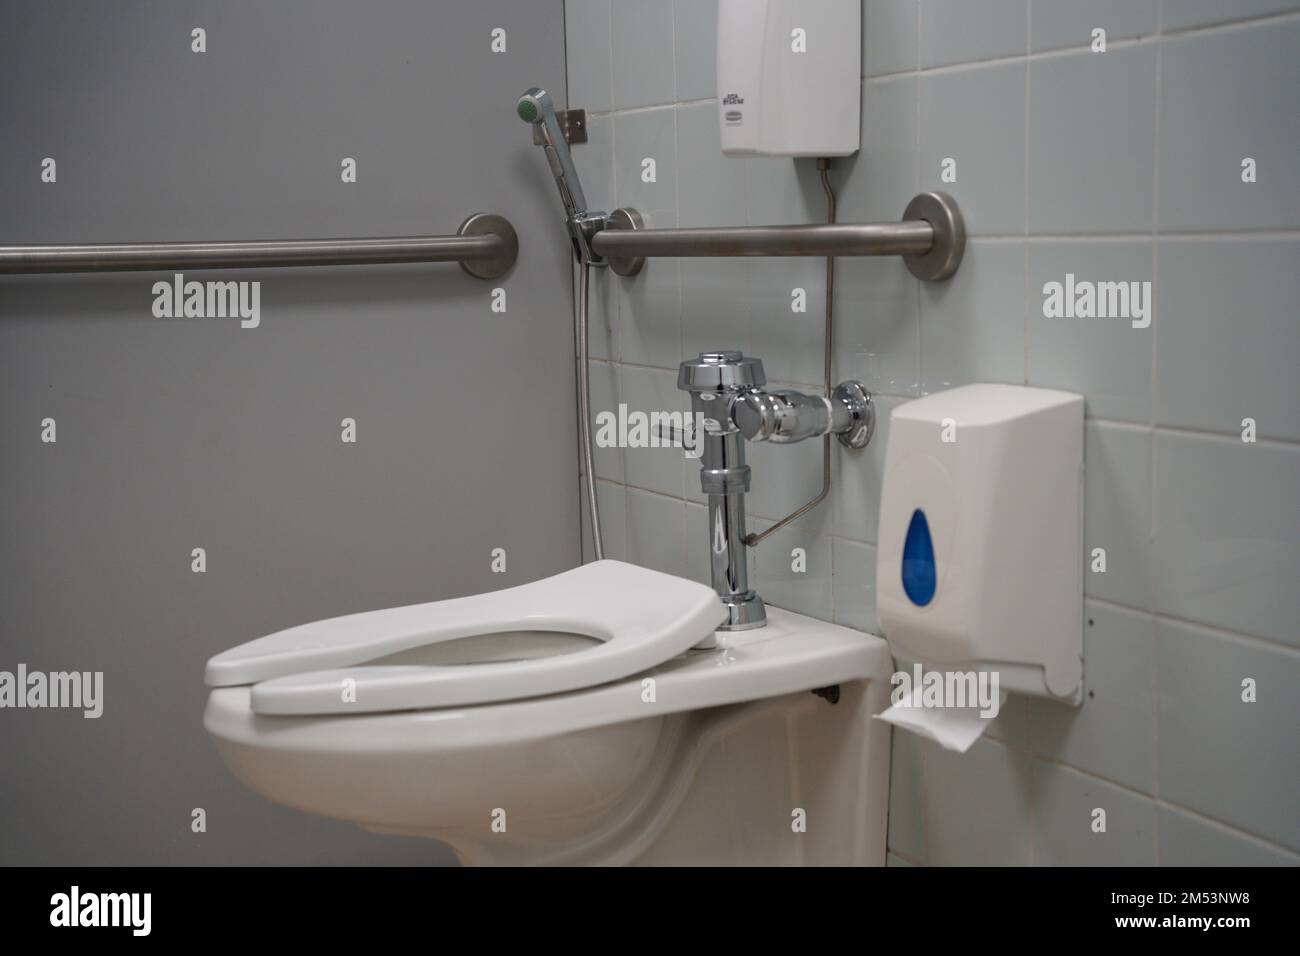 School, university or public handicap toilet, white toilet with washing tool or 'shattaf' and trash can. Arabian toilet with washing spray, modern toi Stock Photo